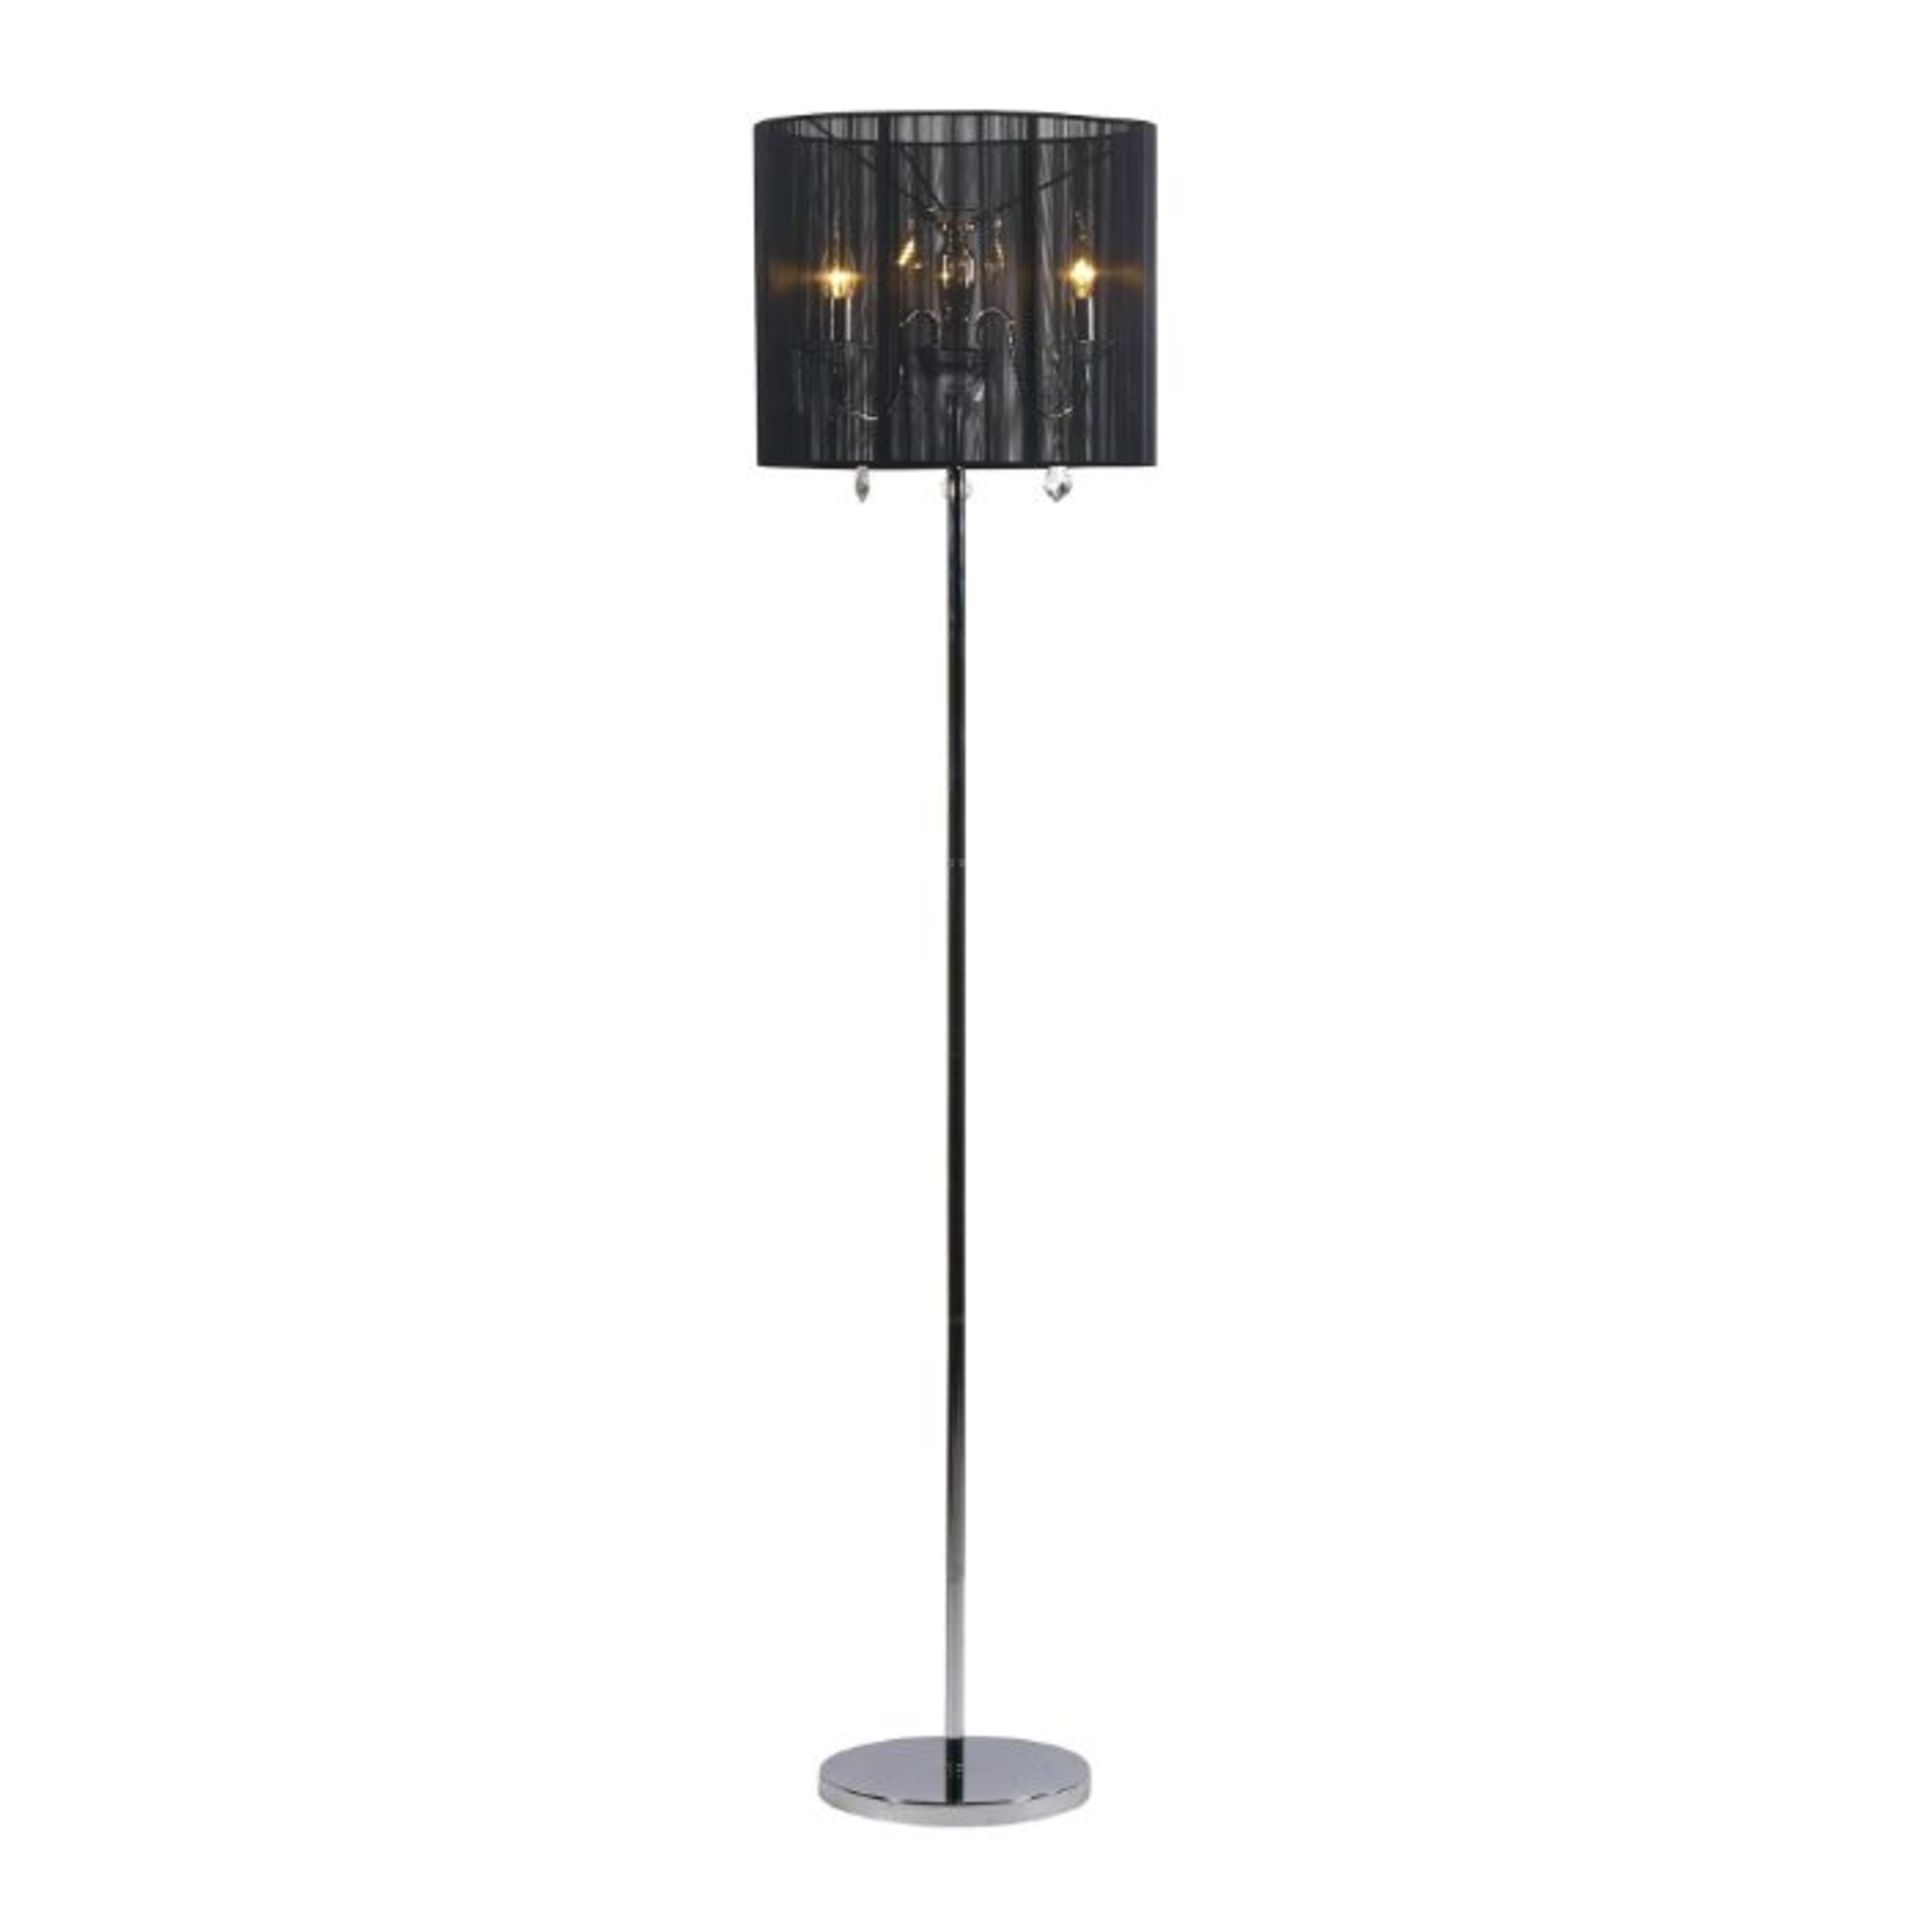 FLOOR LAMP IN CHROME SILVER SHADE (10)